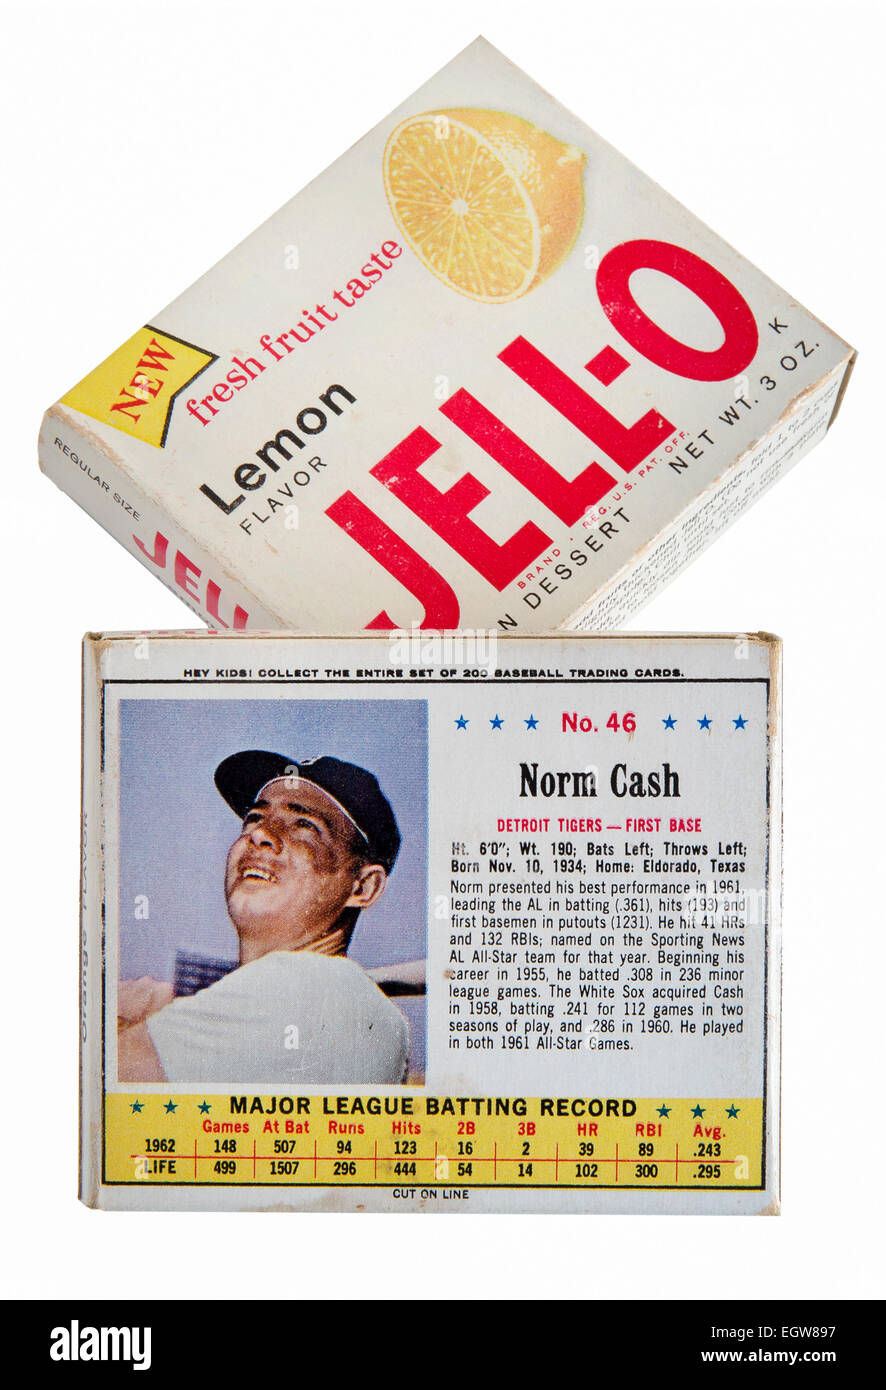 1963 Box of JELL-0 with a Major League Baseball trading card on the back side showing Norm Cash of the Detroit Tigers Stock Photo